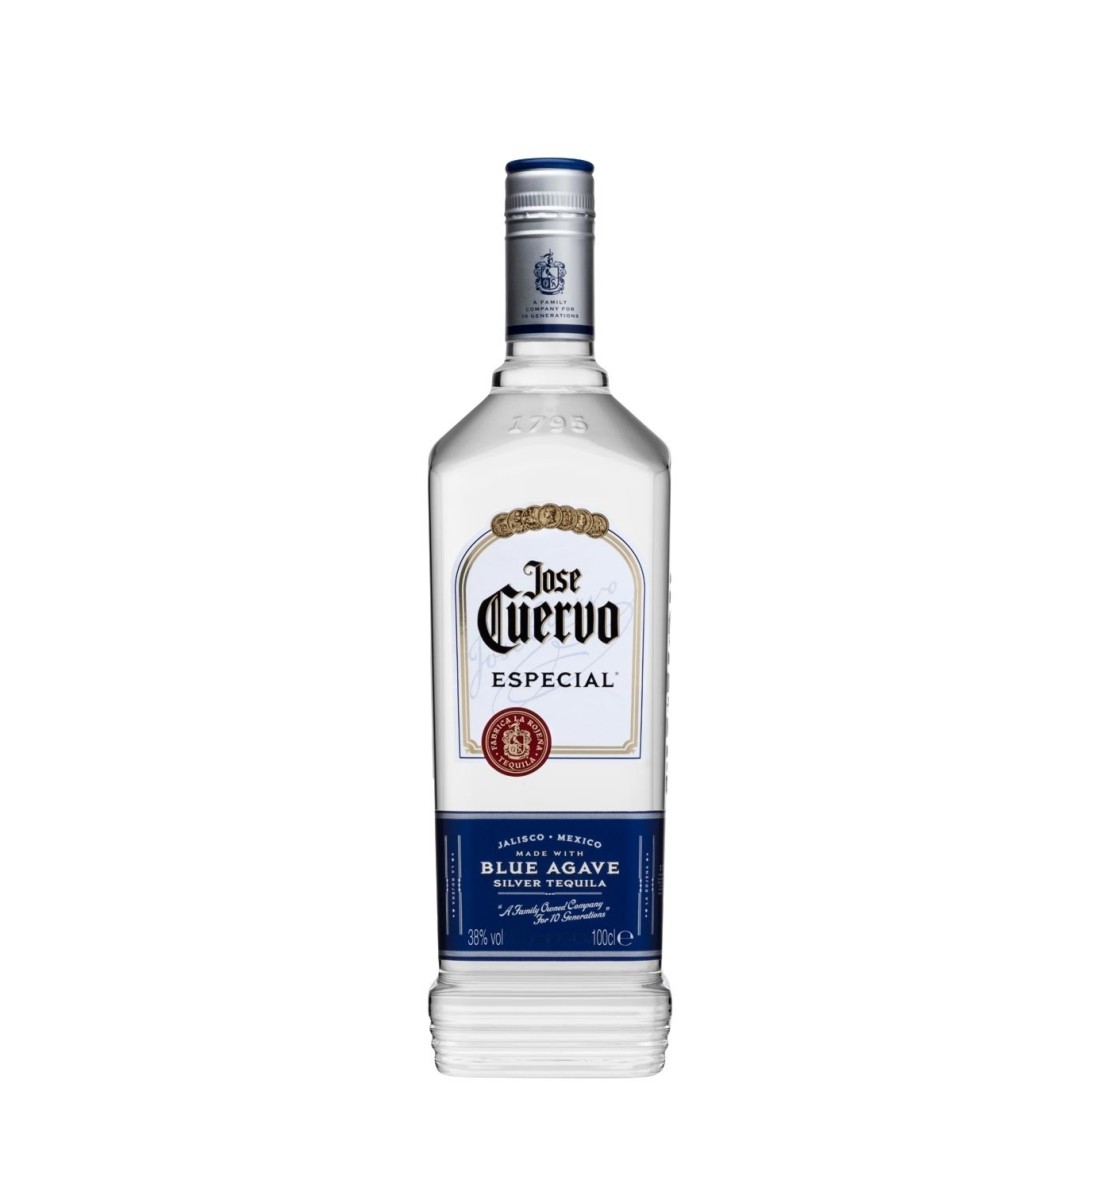 Tequila Jose Cuervo Especial Silver 1L bauturialcoolice.ro